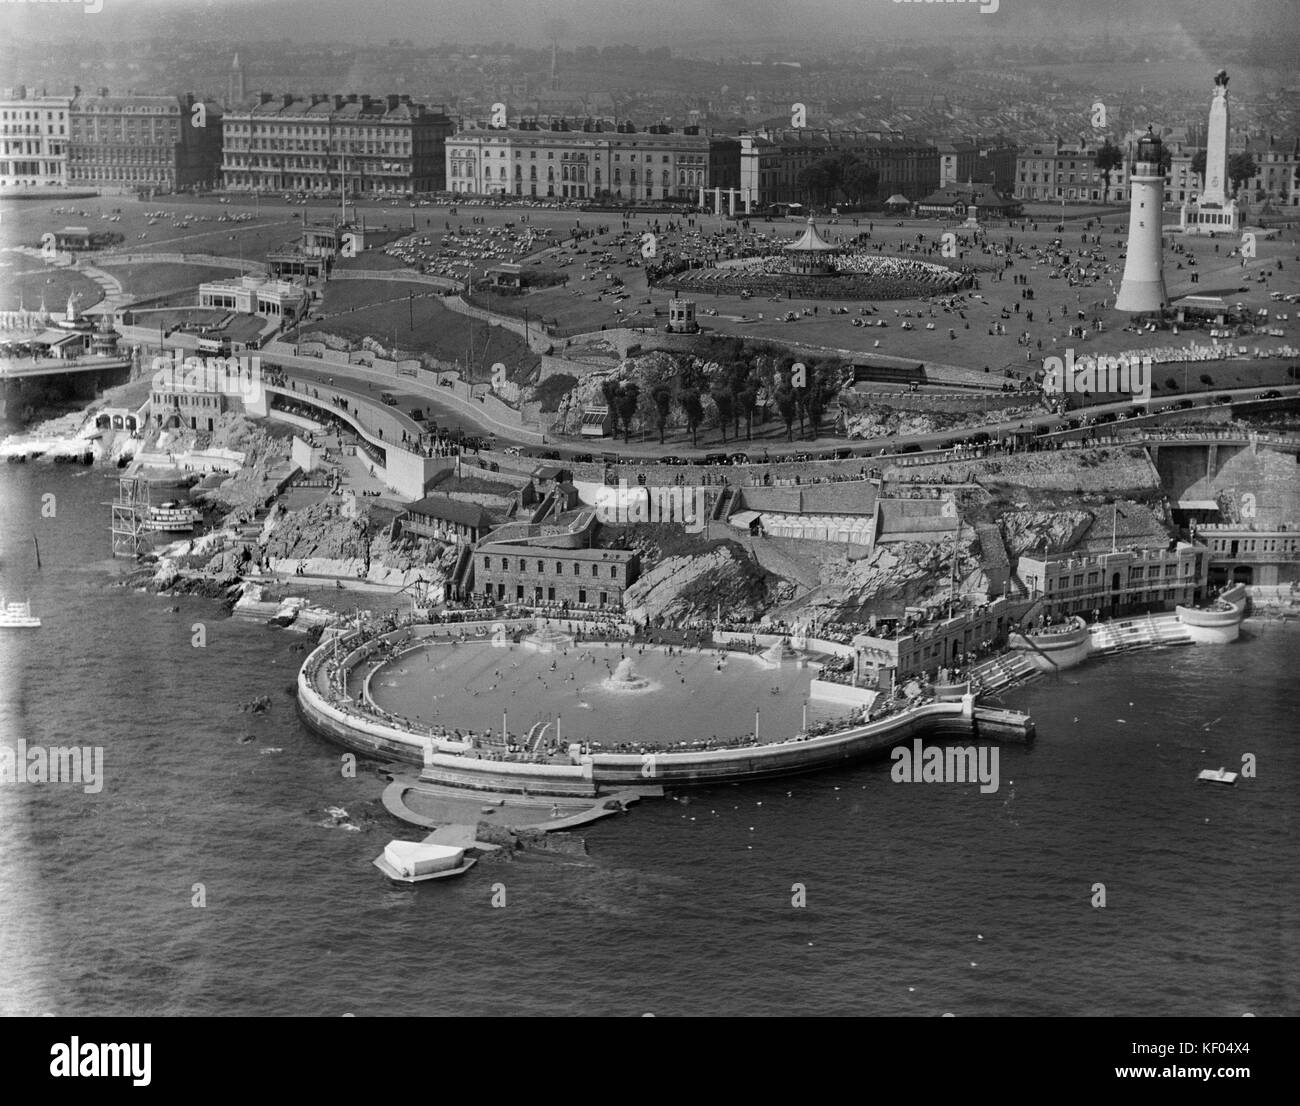 Plymouth Hoe, Devon. Aerial view by Aeropictorial. August 1937. Aerofilms Collection. Stock Photo